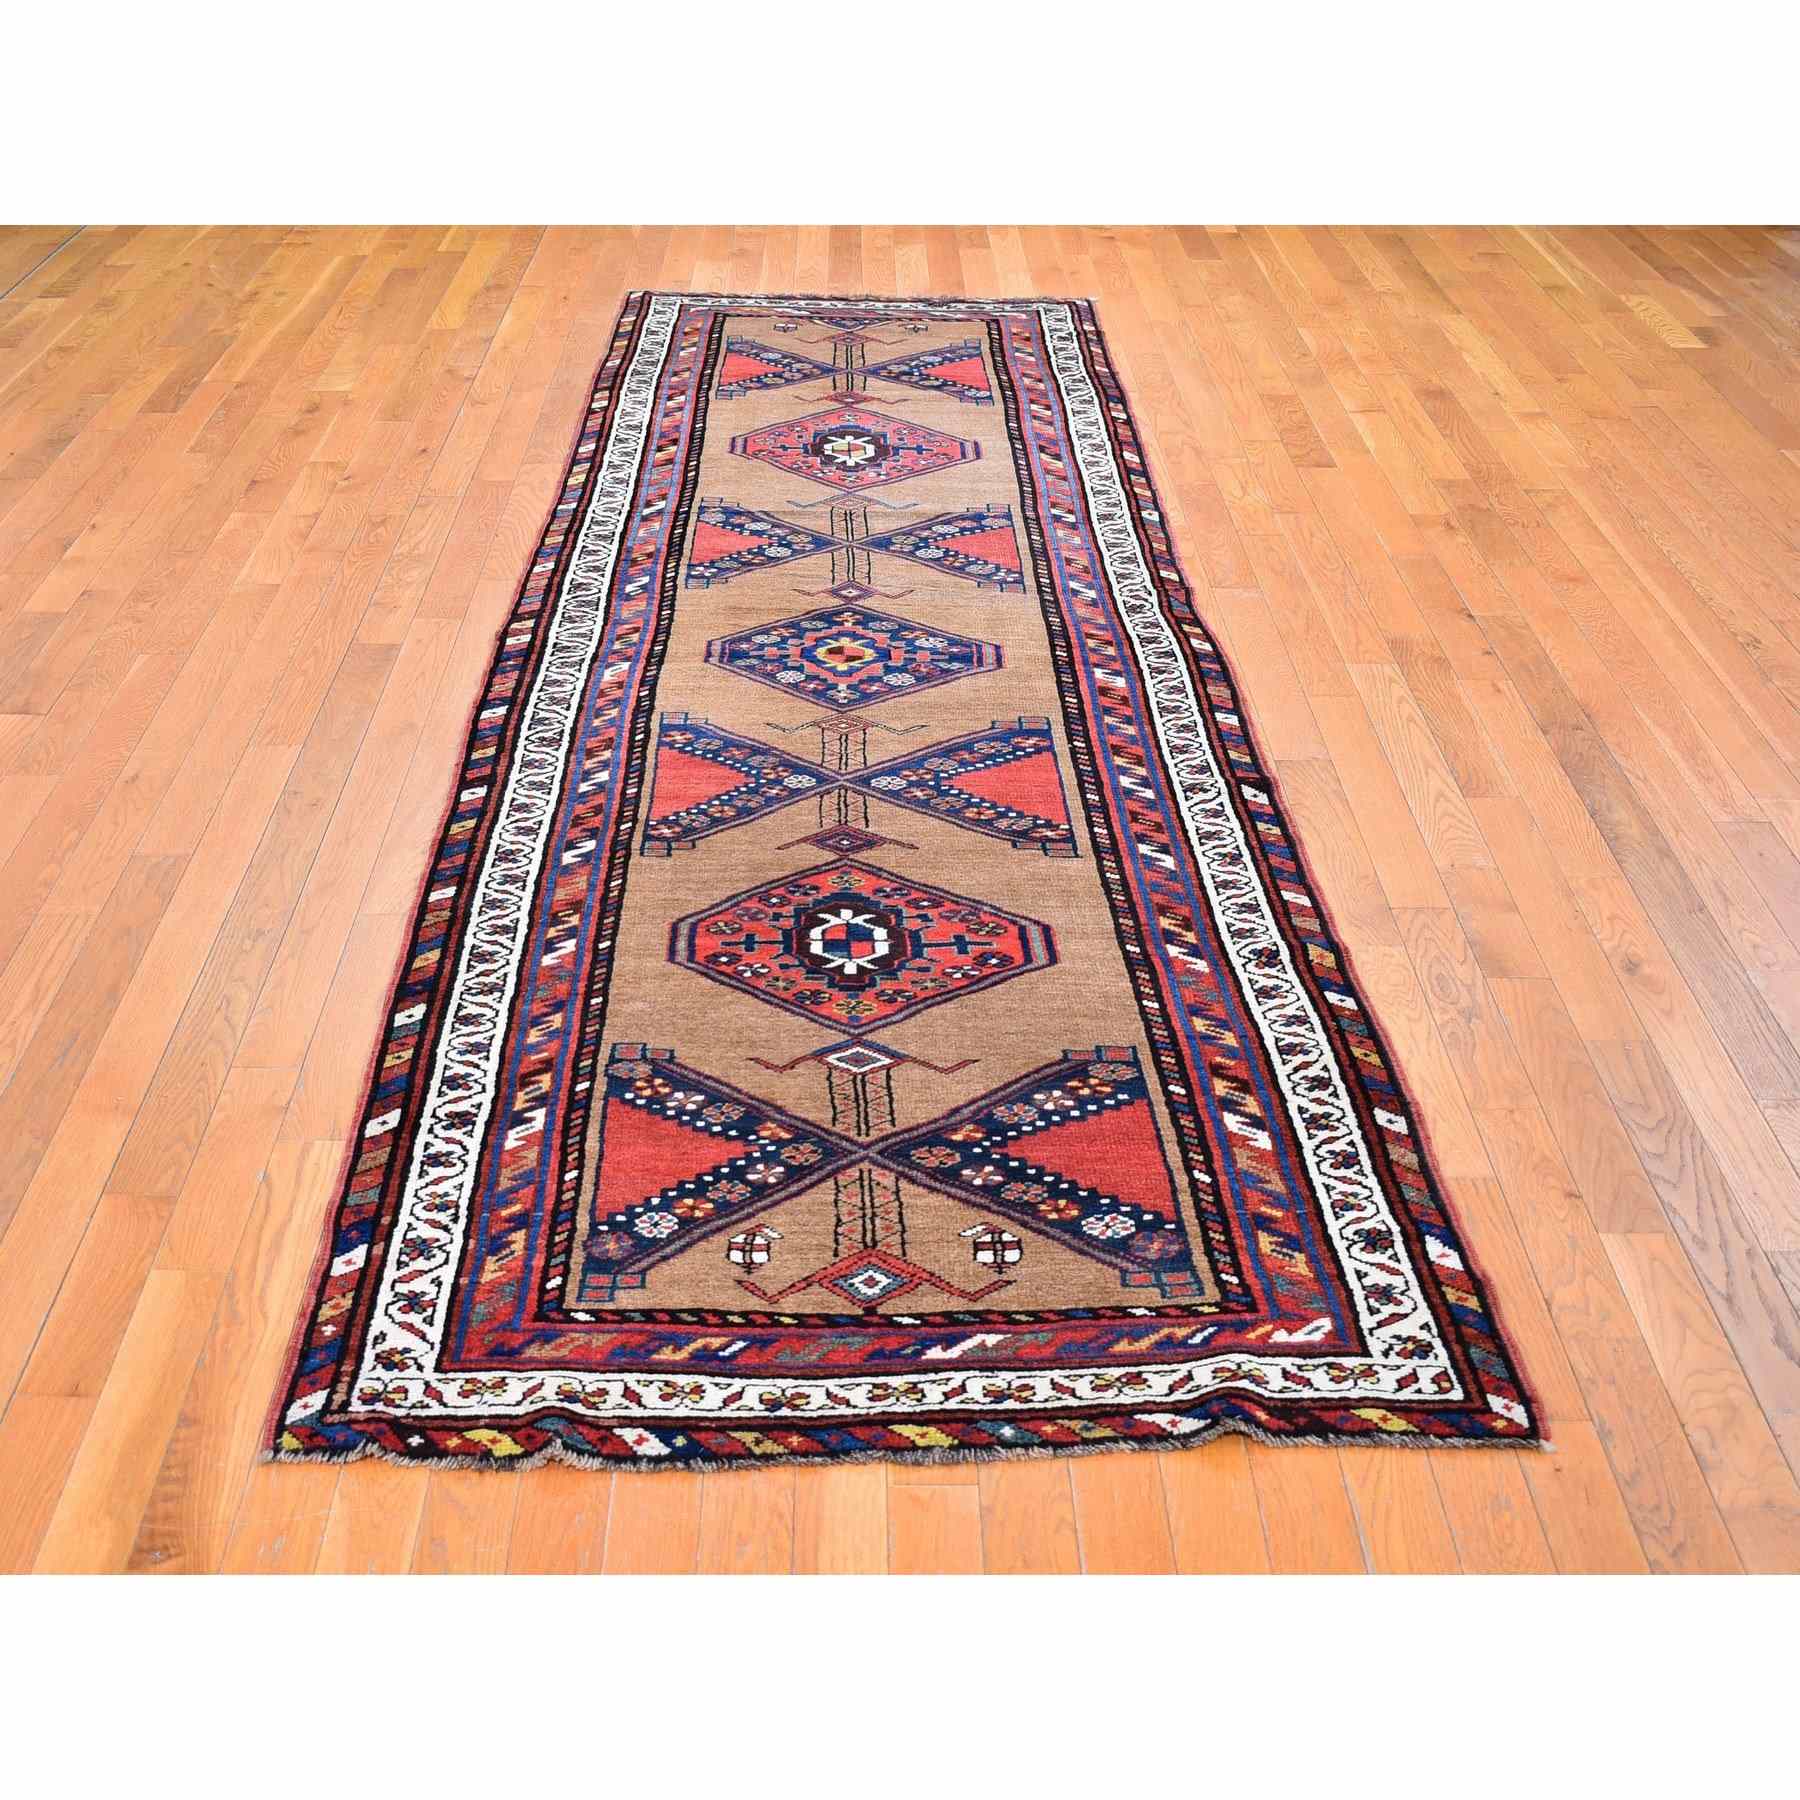 Antique-Hand-Knotted-Rug-330925